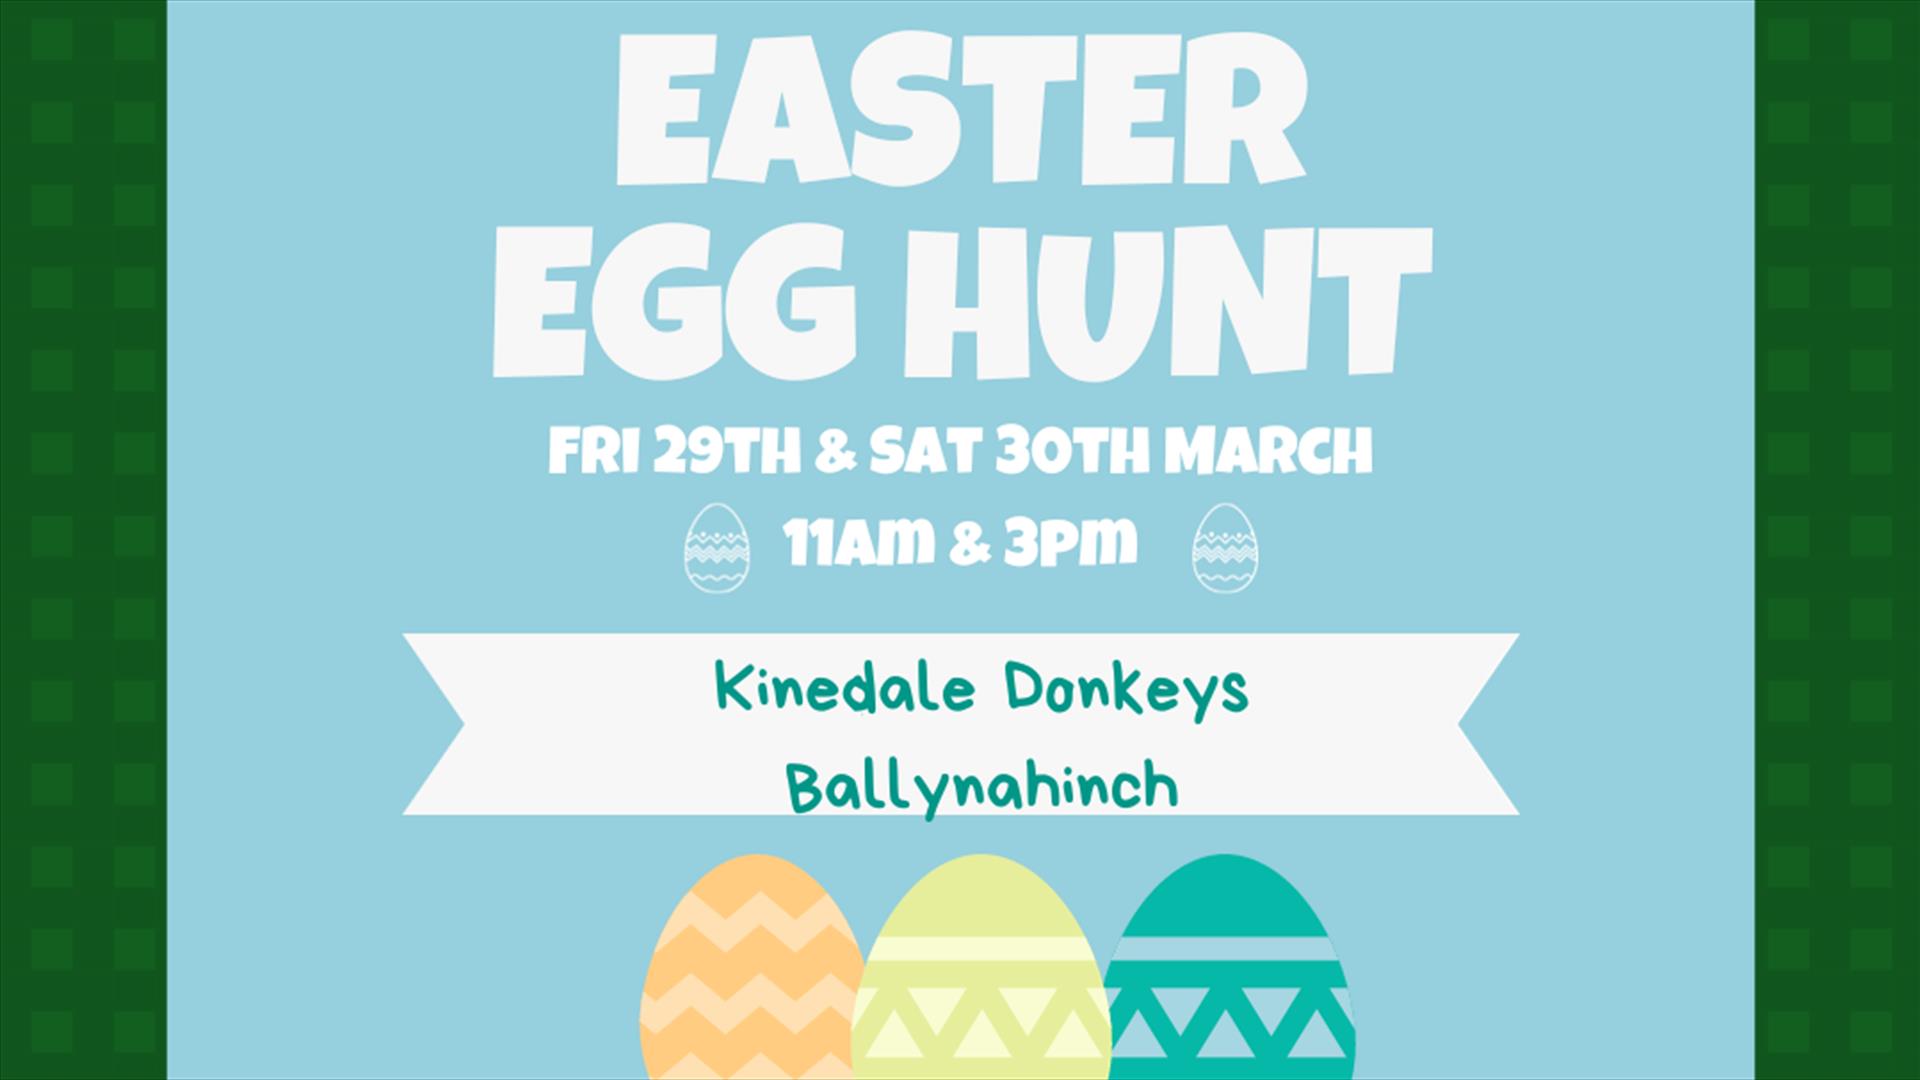 Poster displaying details of an Easter egg hunt at Kinedale Donkeys, Ballynahinch